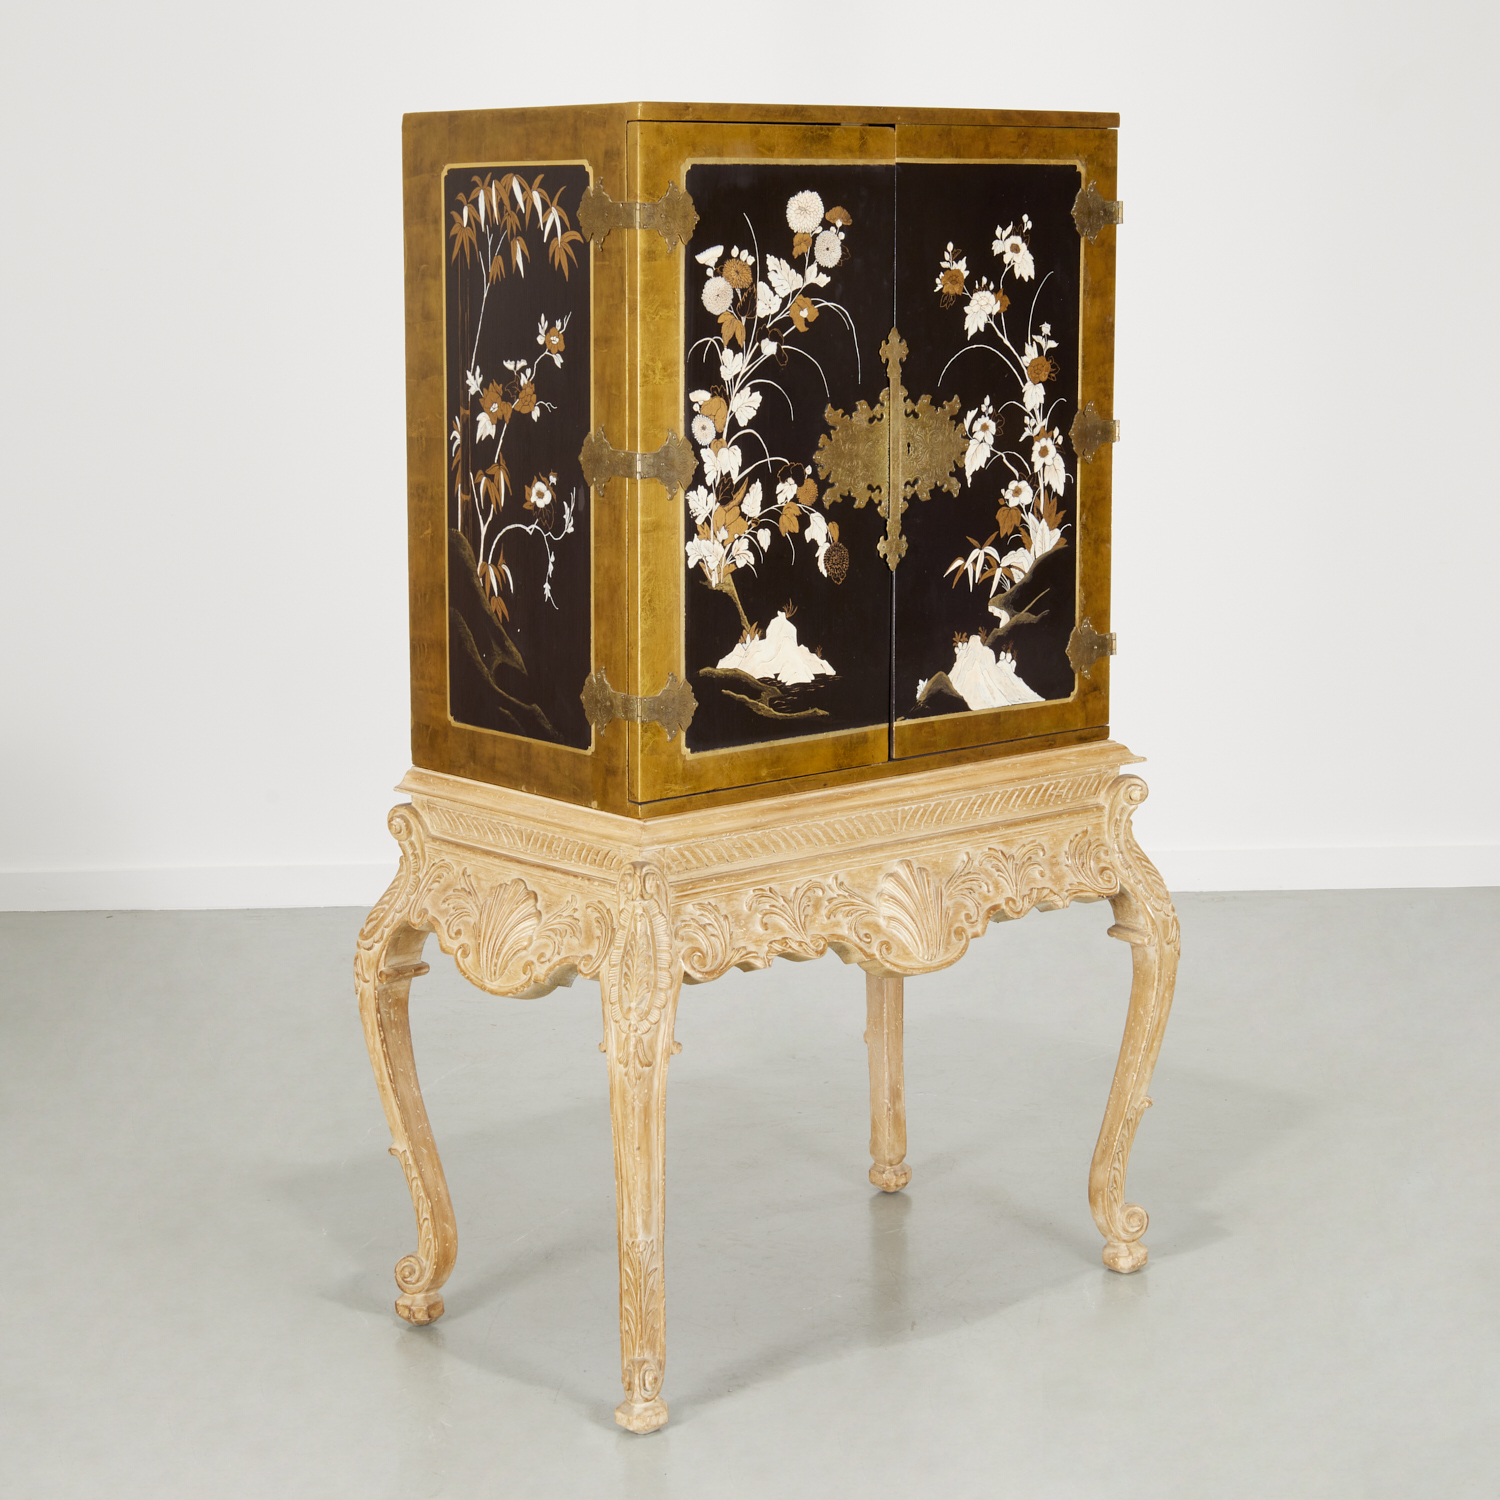 GEORGE I STYLE CHINOISERIE CABINET